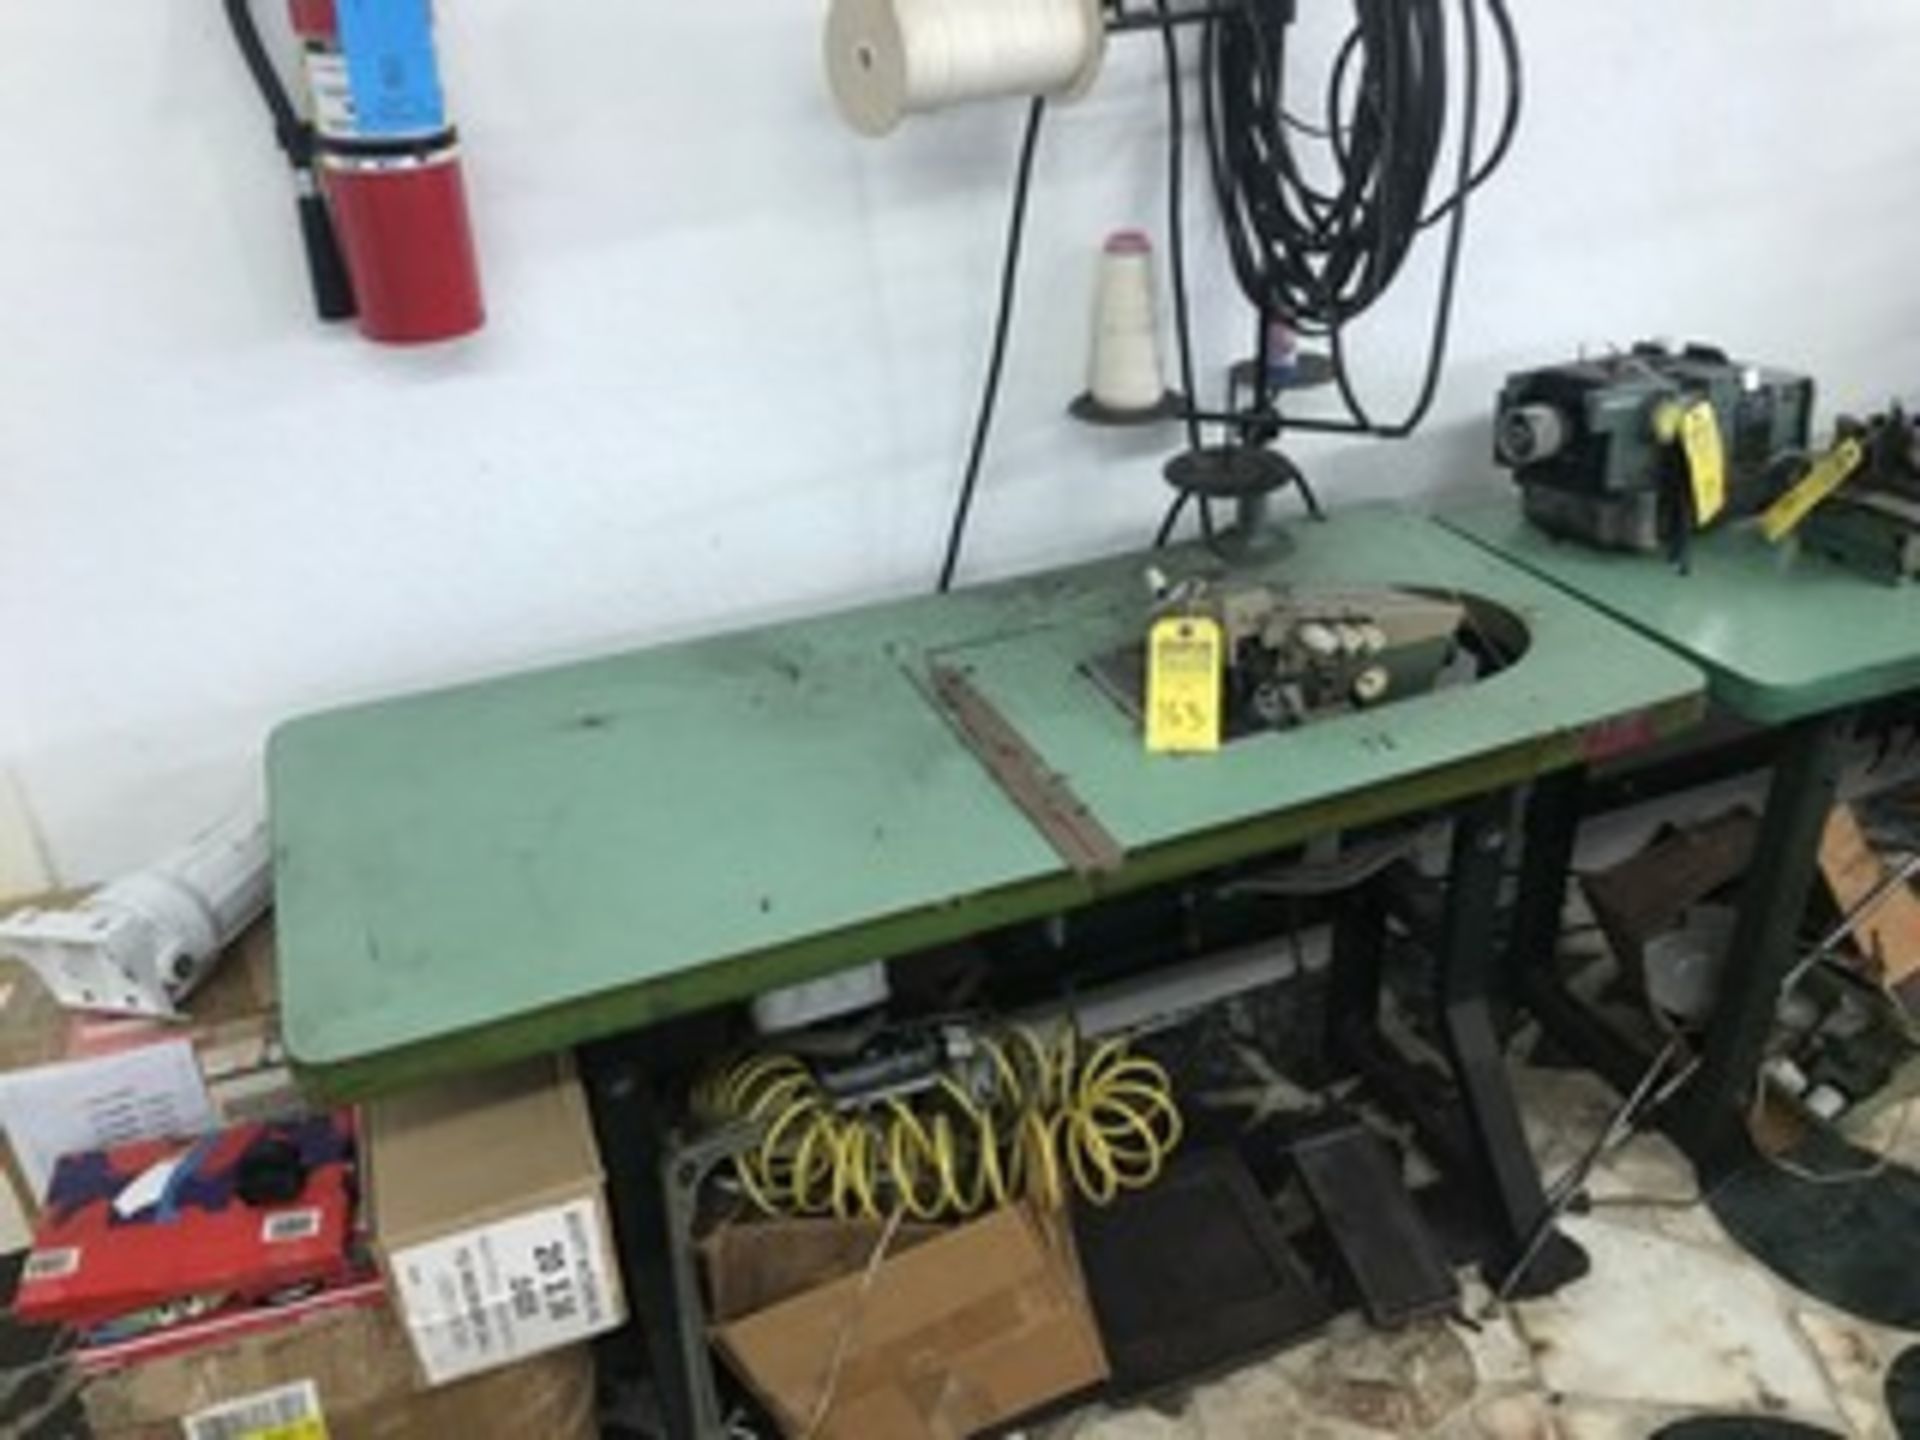 RIMALDI 327-00-1 CD-30 SEWING MACHINE WITH MOTOR & TABLE - Image 2 of 2